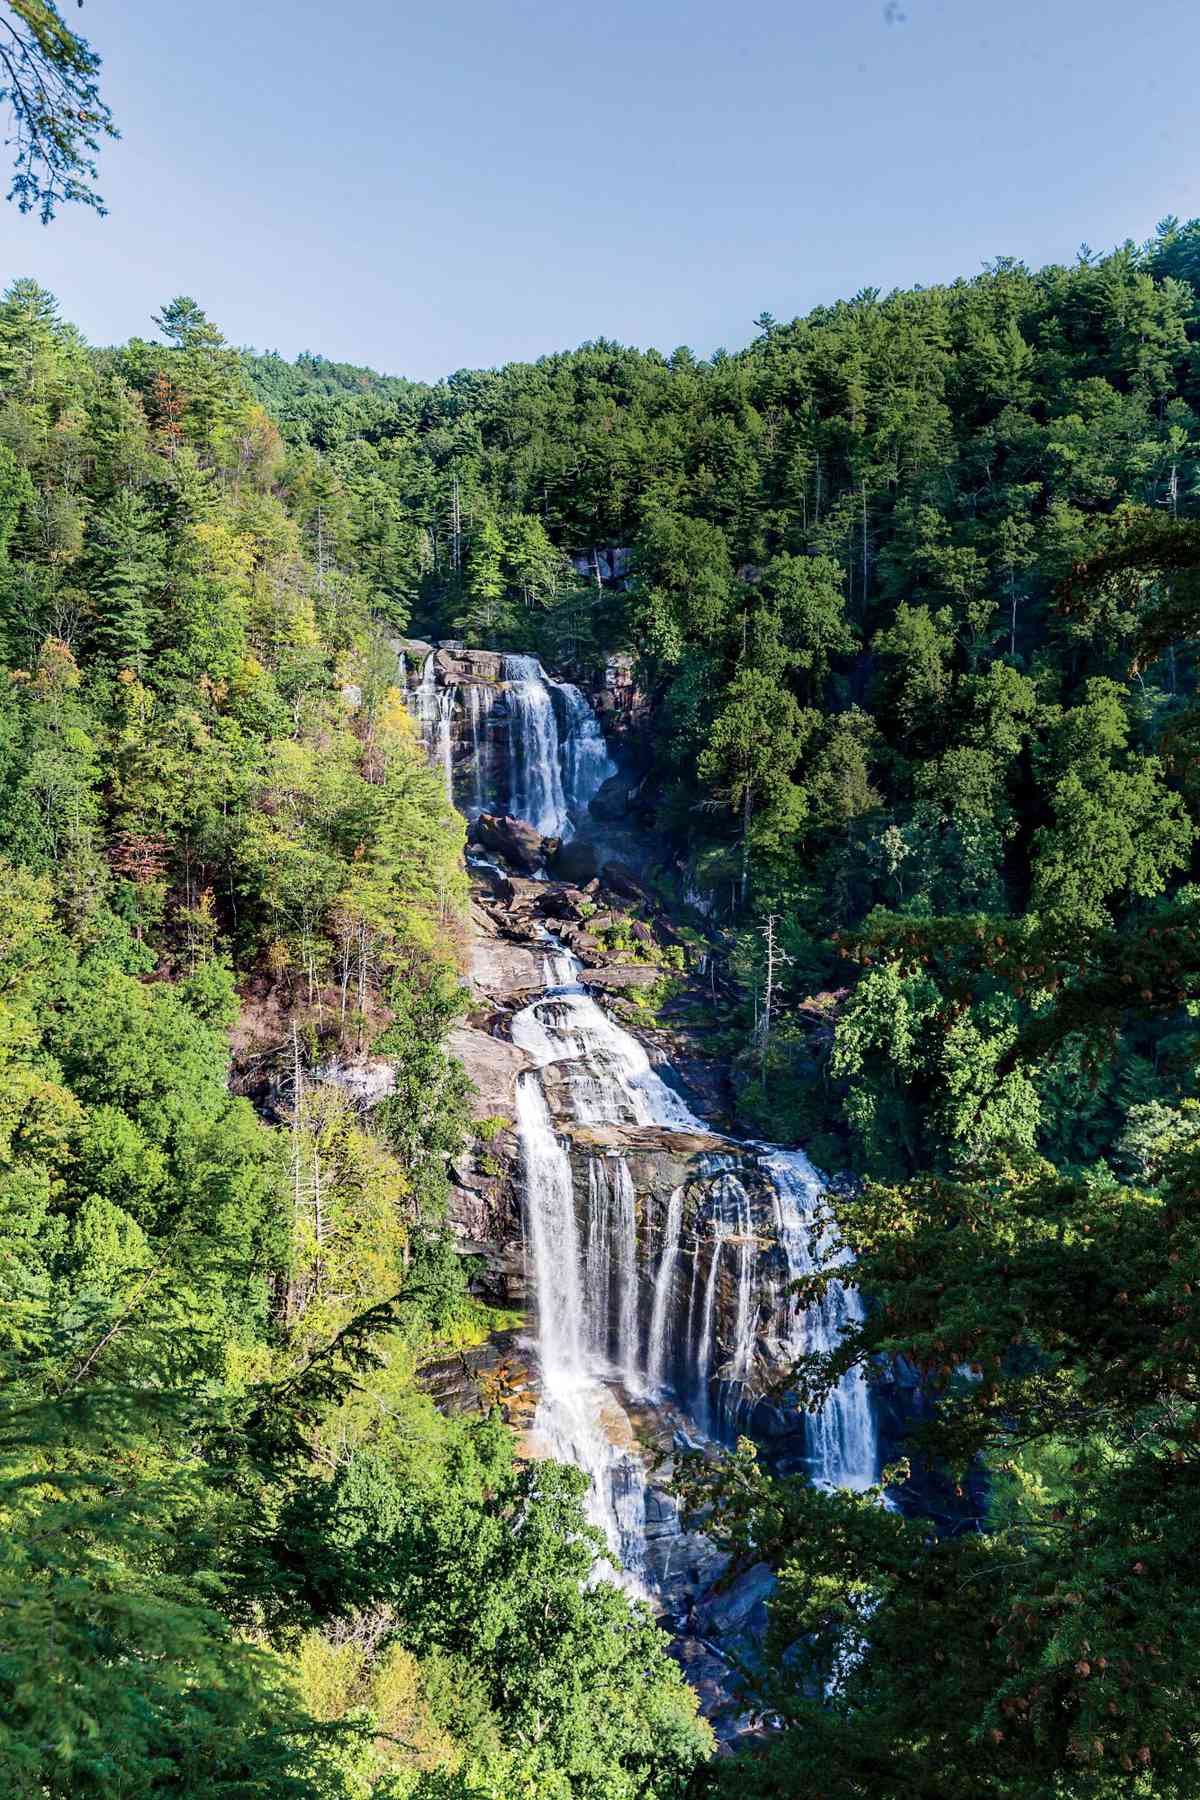 Whitewater Falls in Cashiers, NC